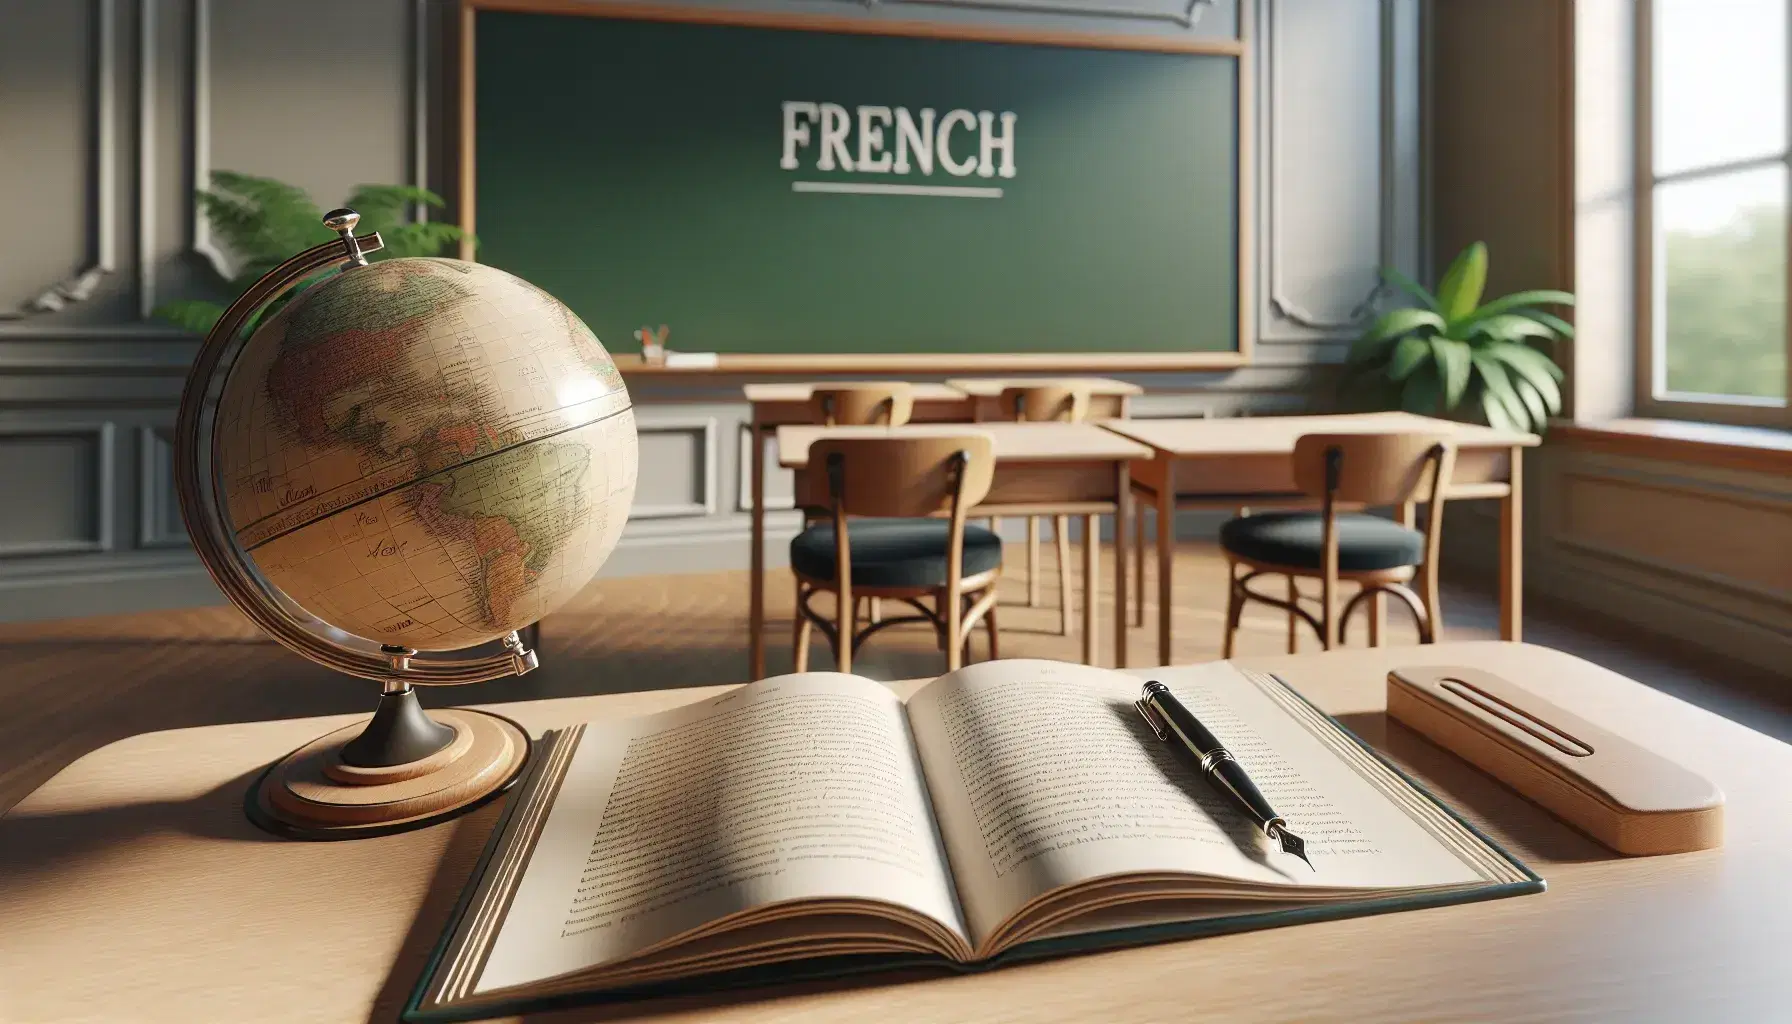 Serene French language classroom with a polished desk, open textbook, fountain pen, clean chalkboard, globe on a round table, and a potted plant by the window.